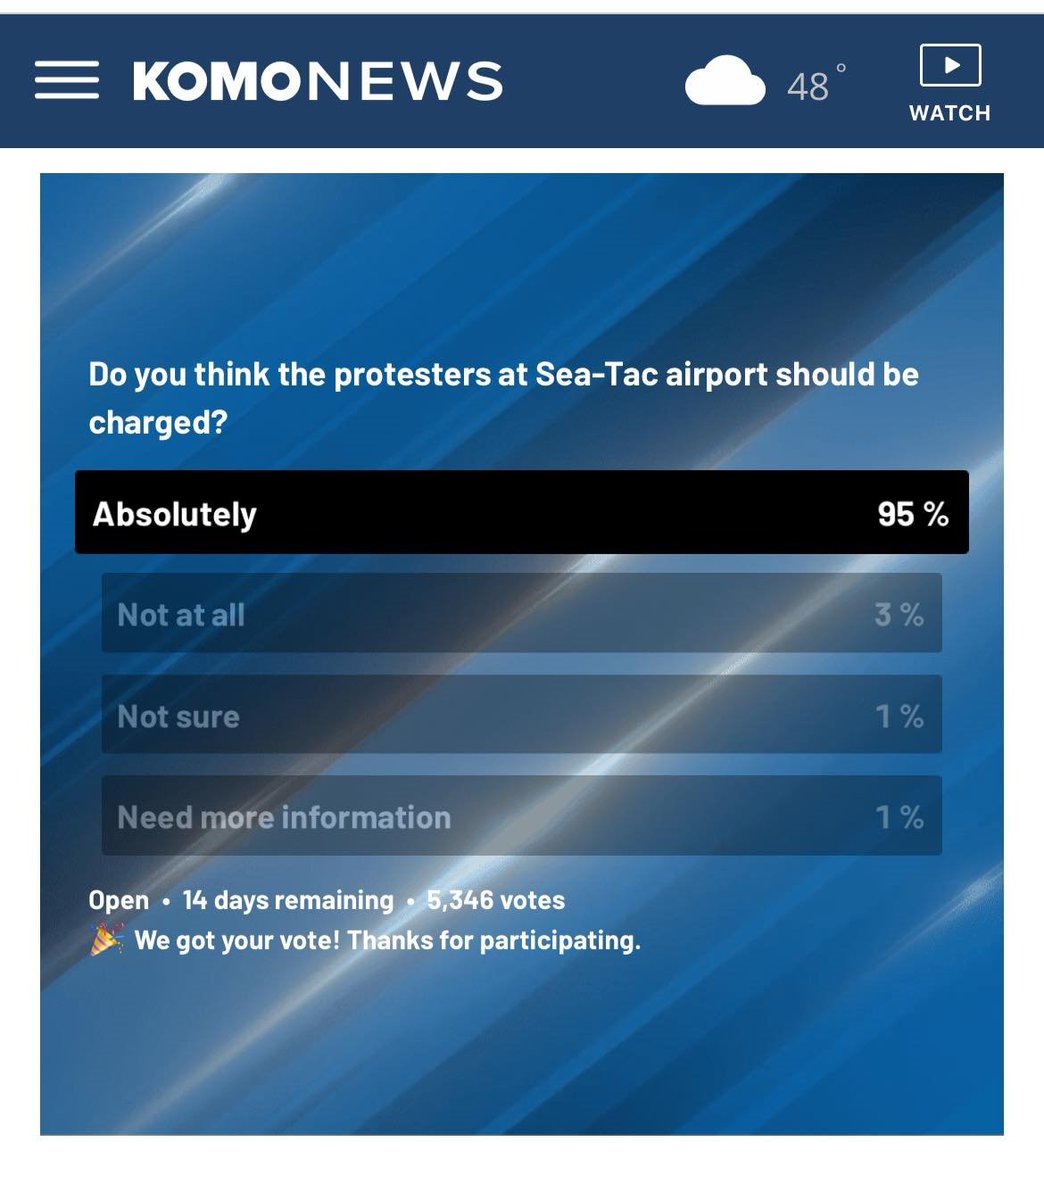 95% of respondents think airport protesters should be criminally charged. What could explain this weird result? (a) People didn't understand the question. (b) B-b-but muh First Amendment. (c) KOMO is owned by Sinclair, so.... (d) Zionism, blah-blah-blah.